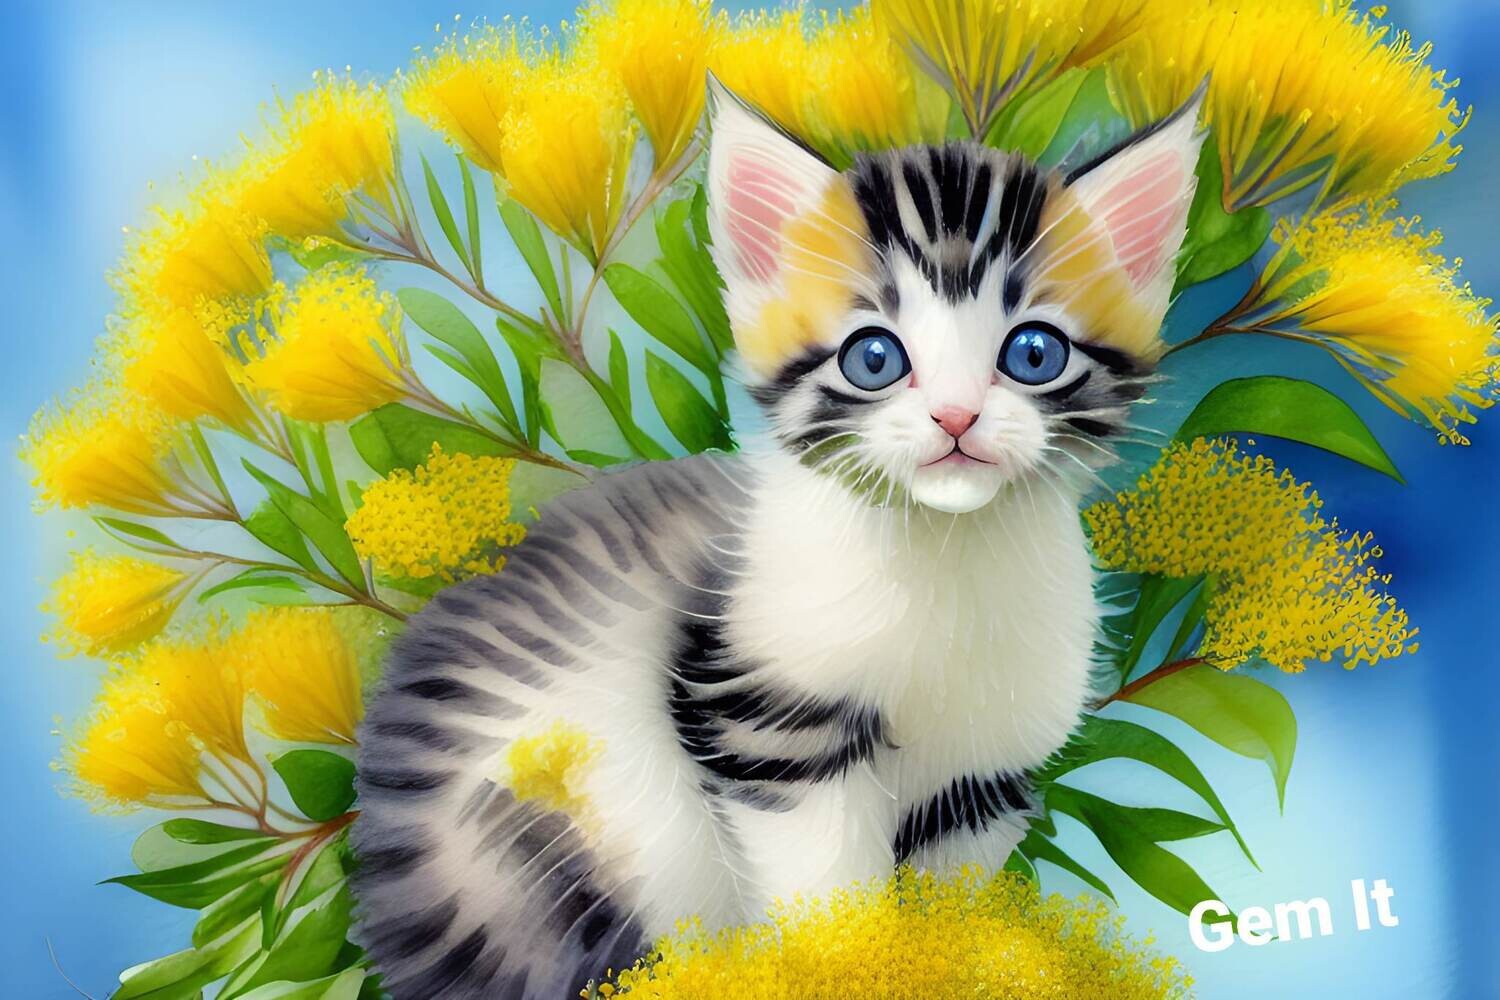 Kitten in Wattle 2 - Specially ordered for you. Delivery is approximately 4 - 6 weeks.